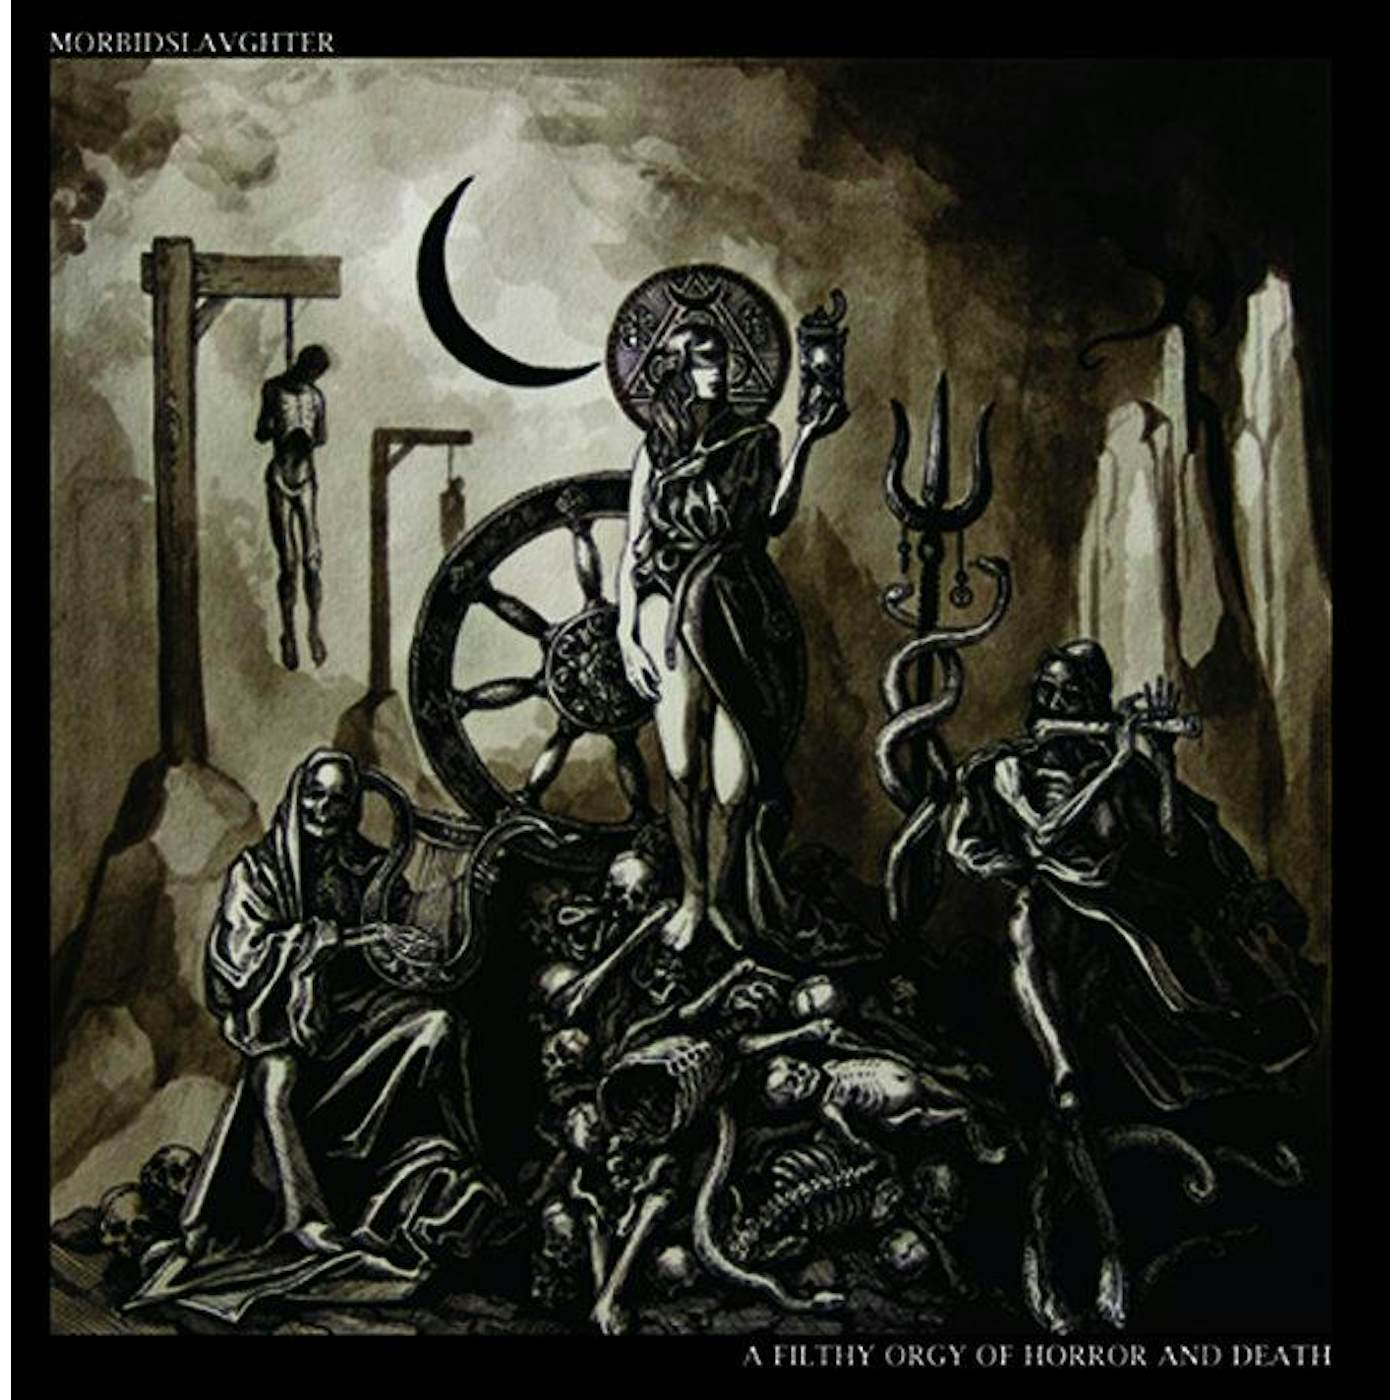 Morbidslavghter (Morbid Slaughter) - A Filthy Orgy Of Horror And Death lp (Vinyl)